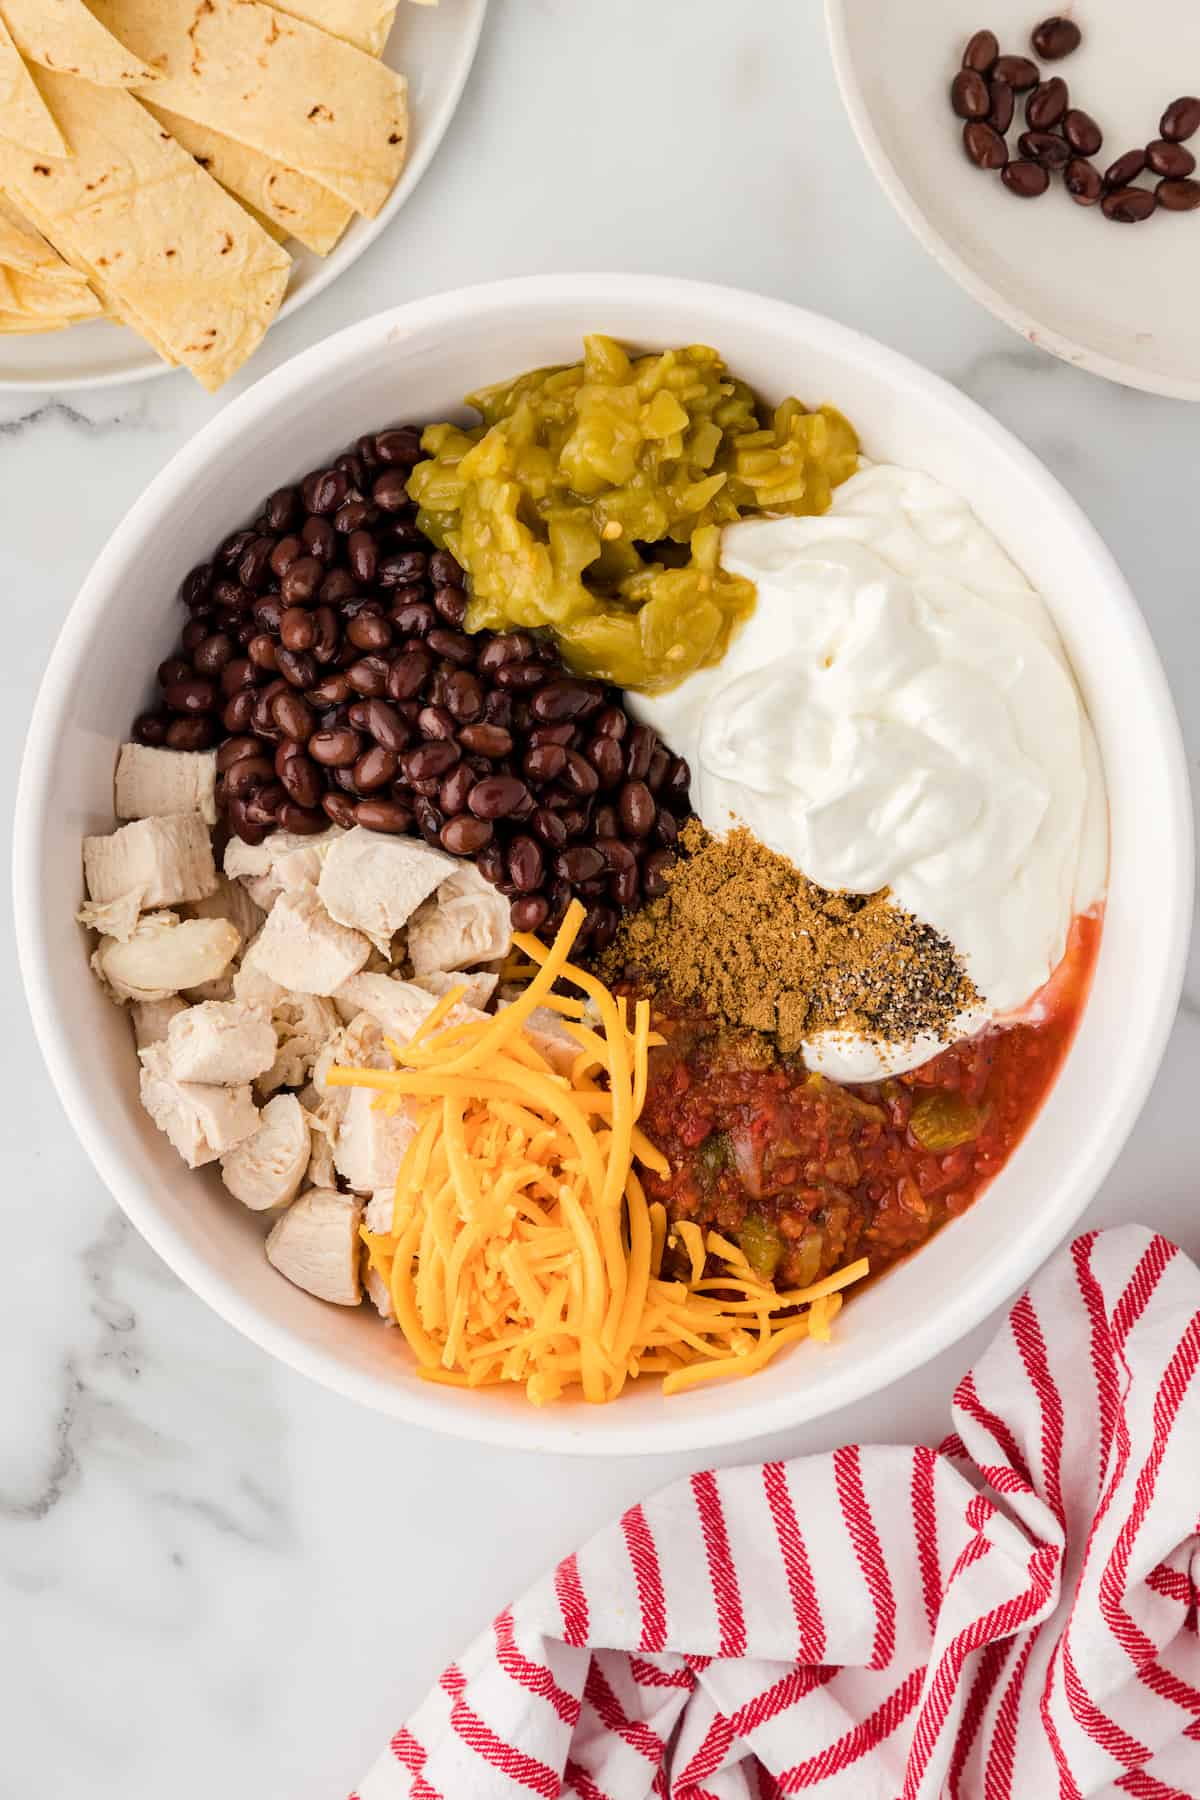 mix all the ingredients together in a large bowl